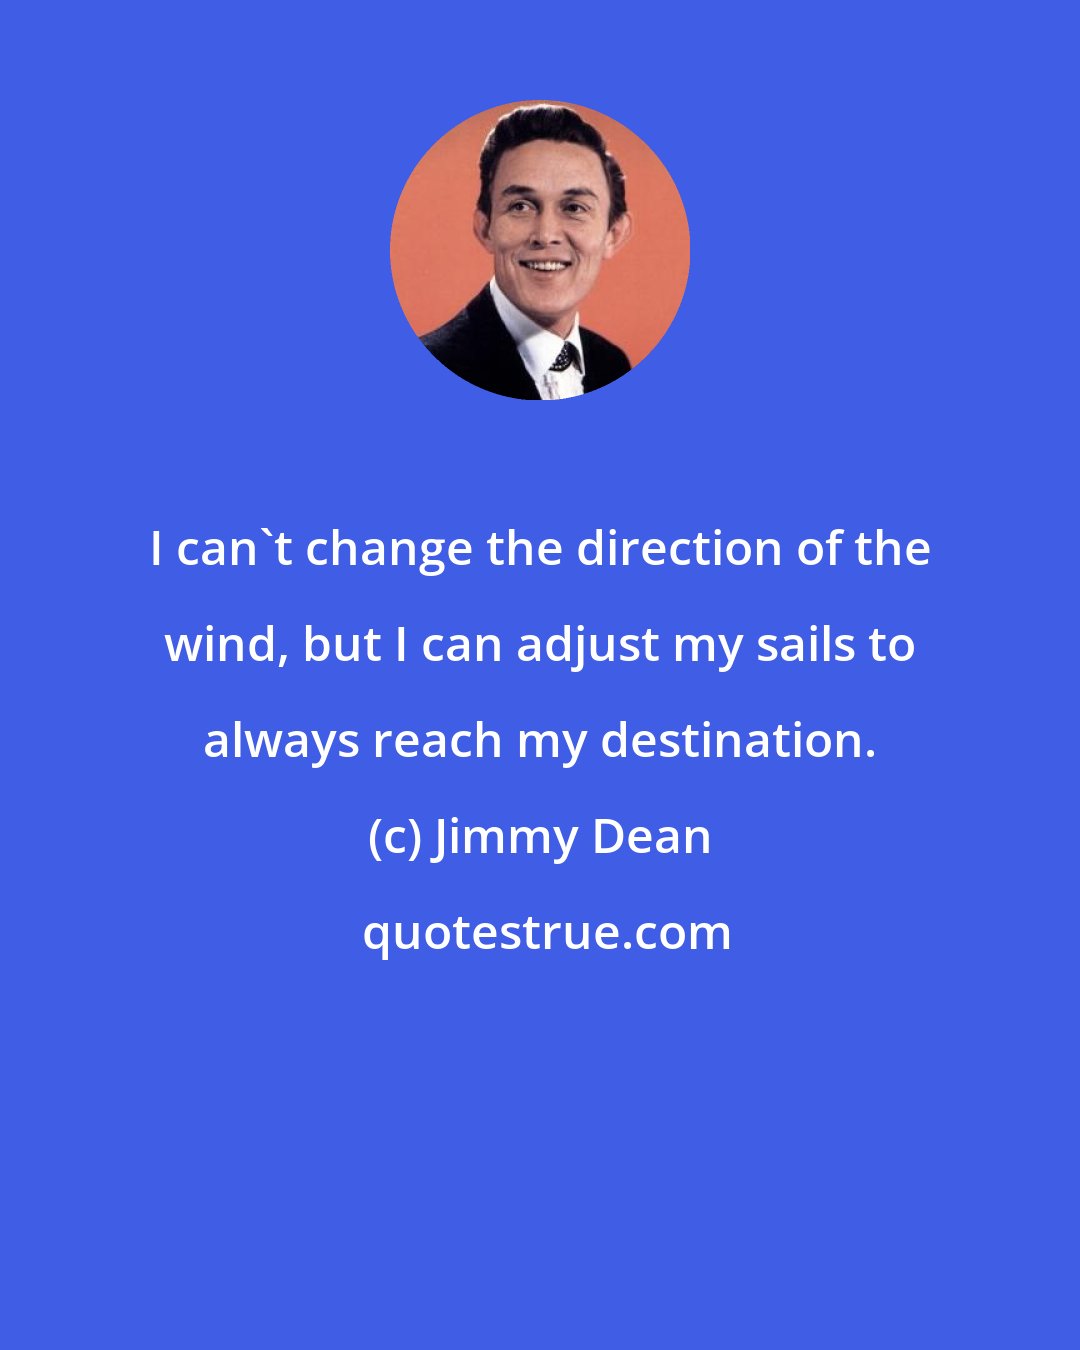 Jimmy Dean: I can't change the direction of the wind, but I can adjust my sails to always reach my destination.